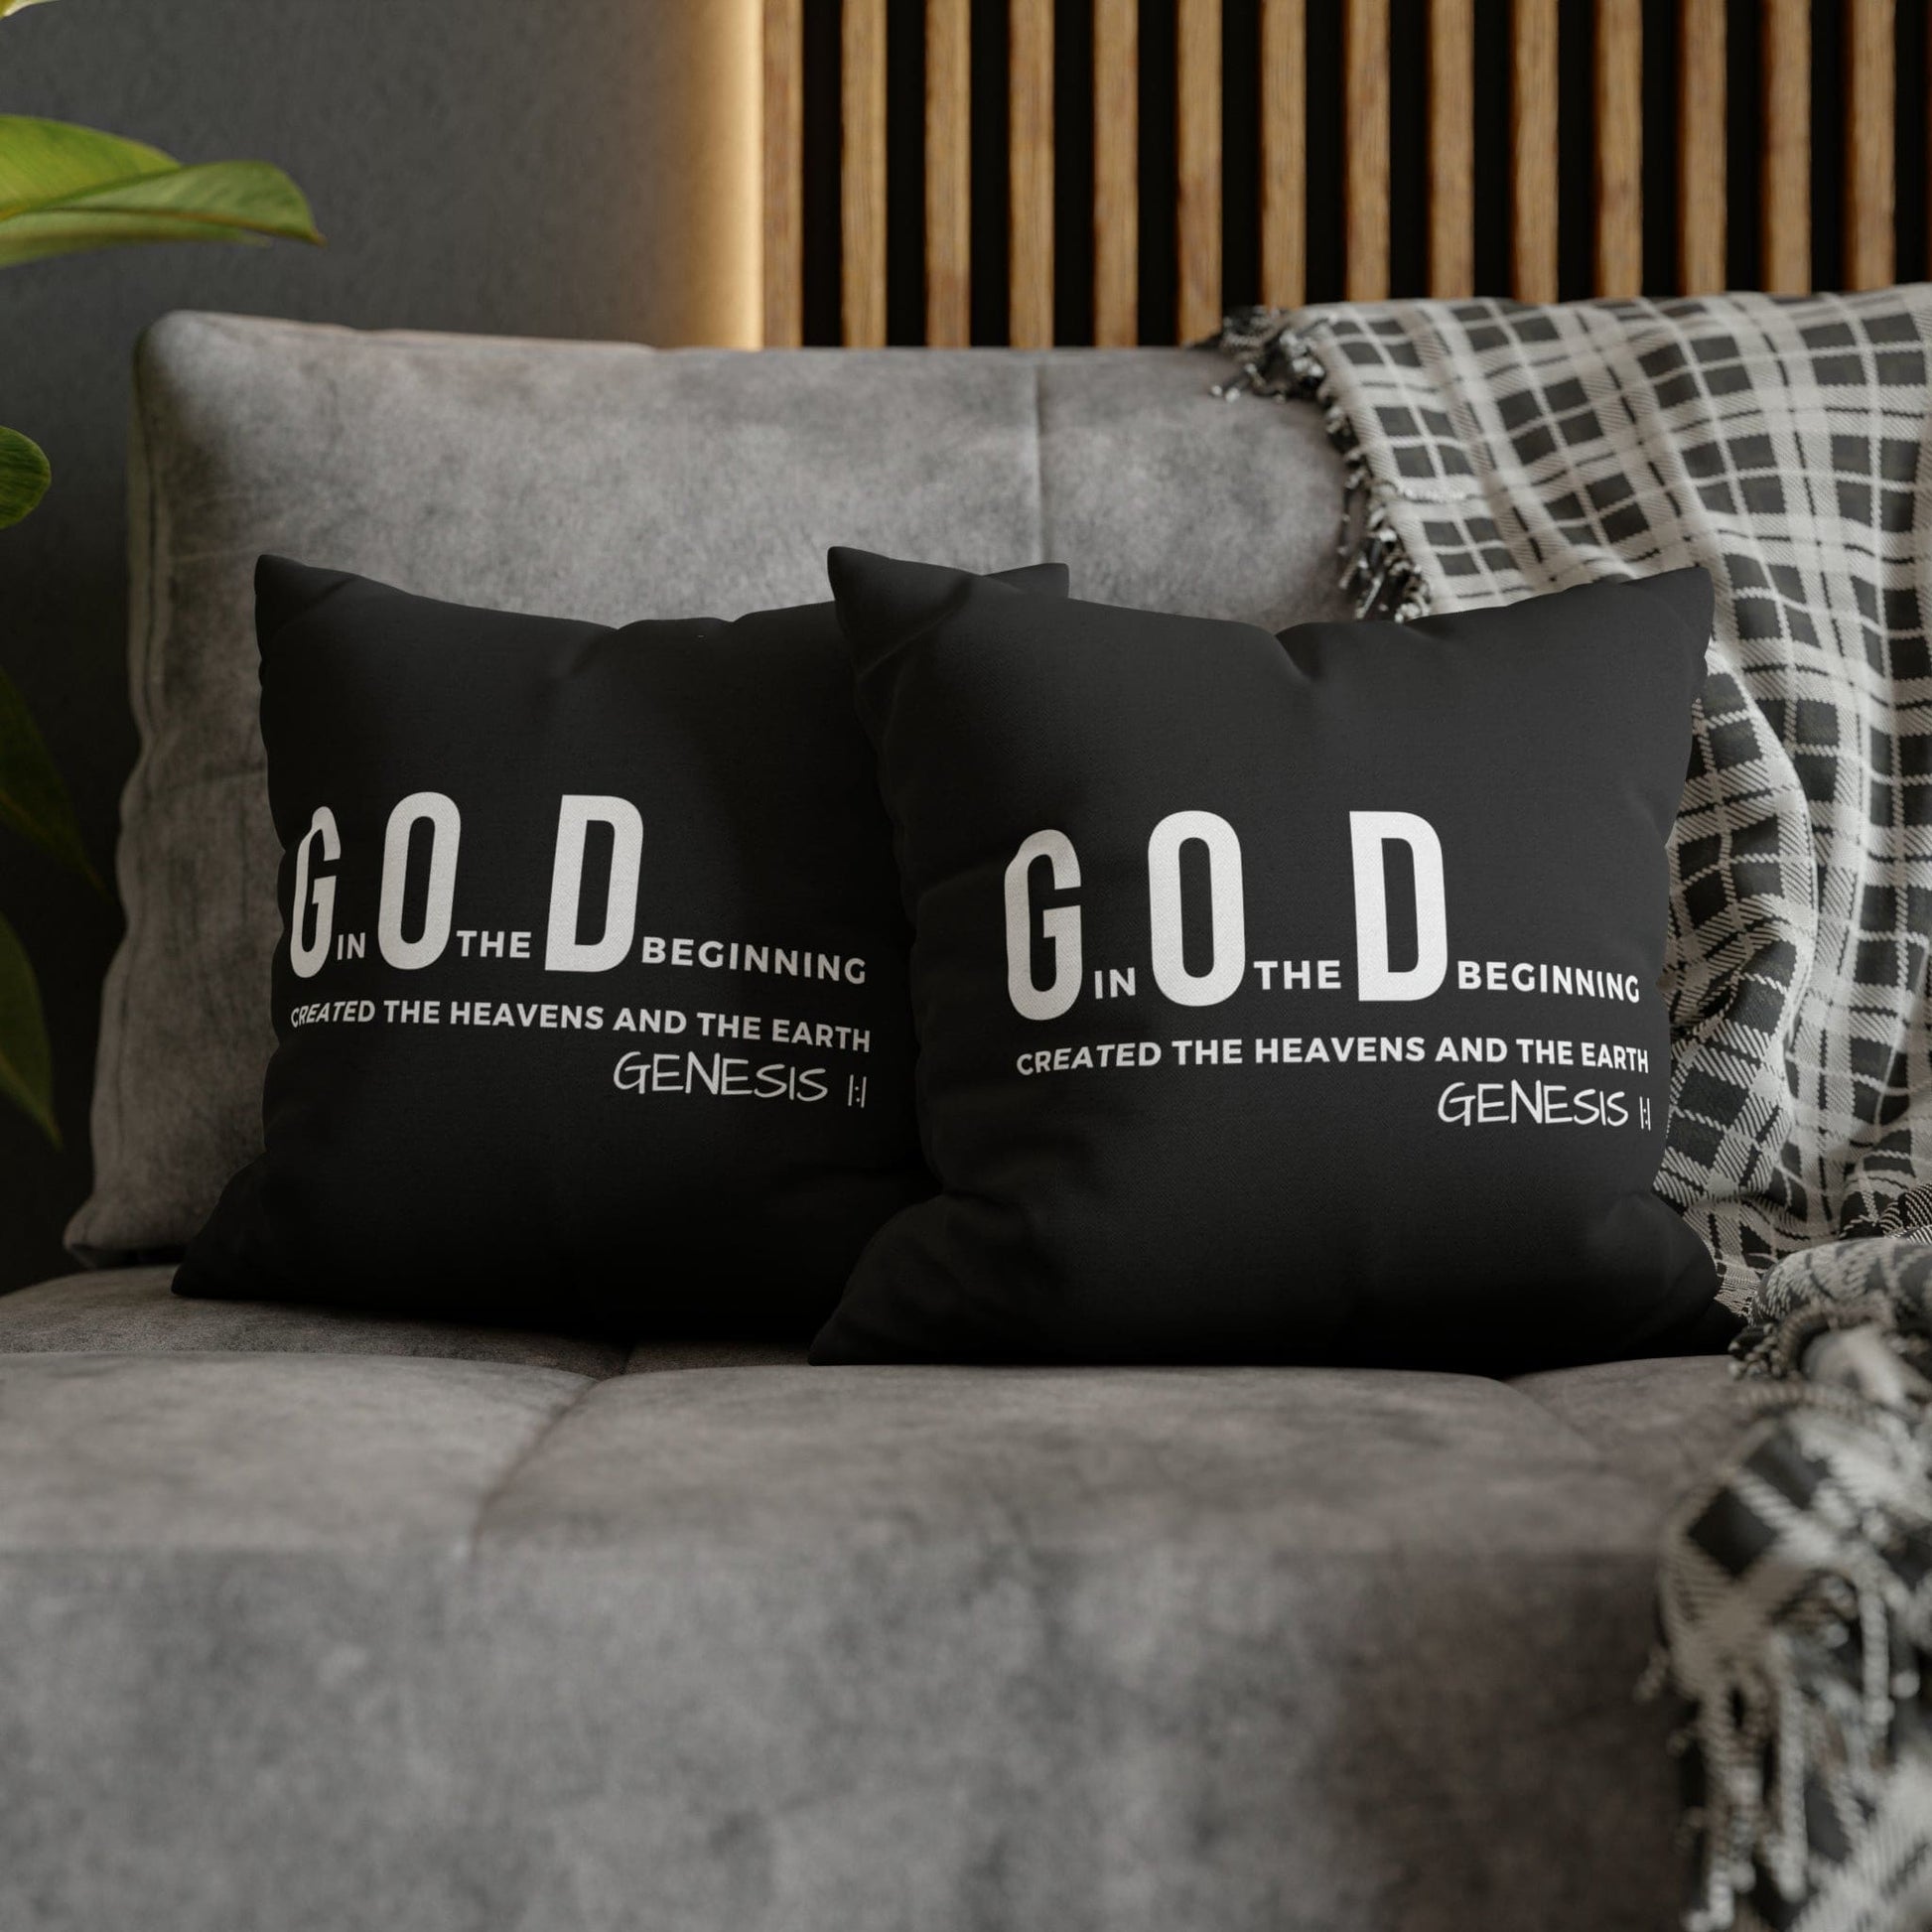 Decorative Throw Pillow Cover - Set Of 2, God In The Beginning Created The Heavens And The Earth - Scripture Verse-15